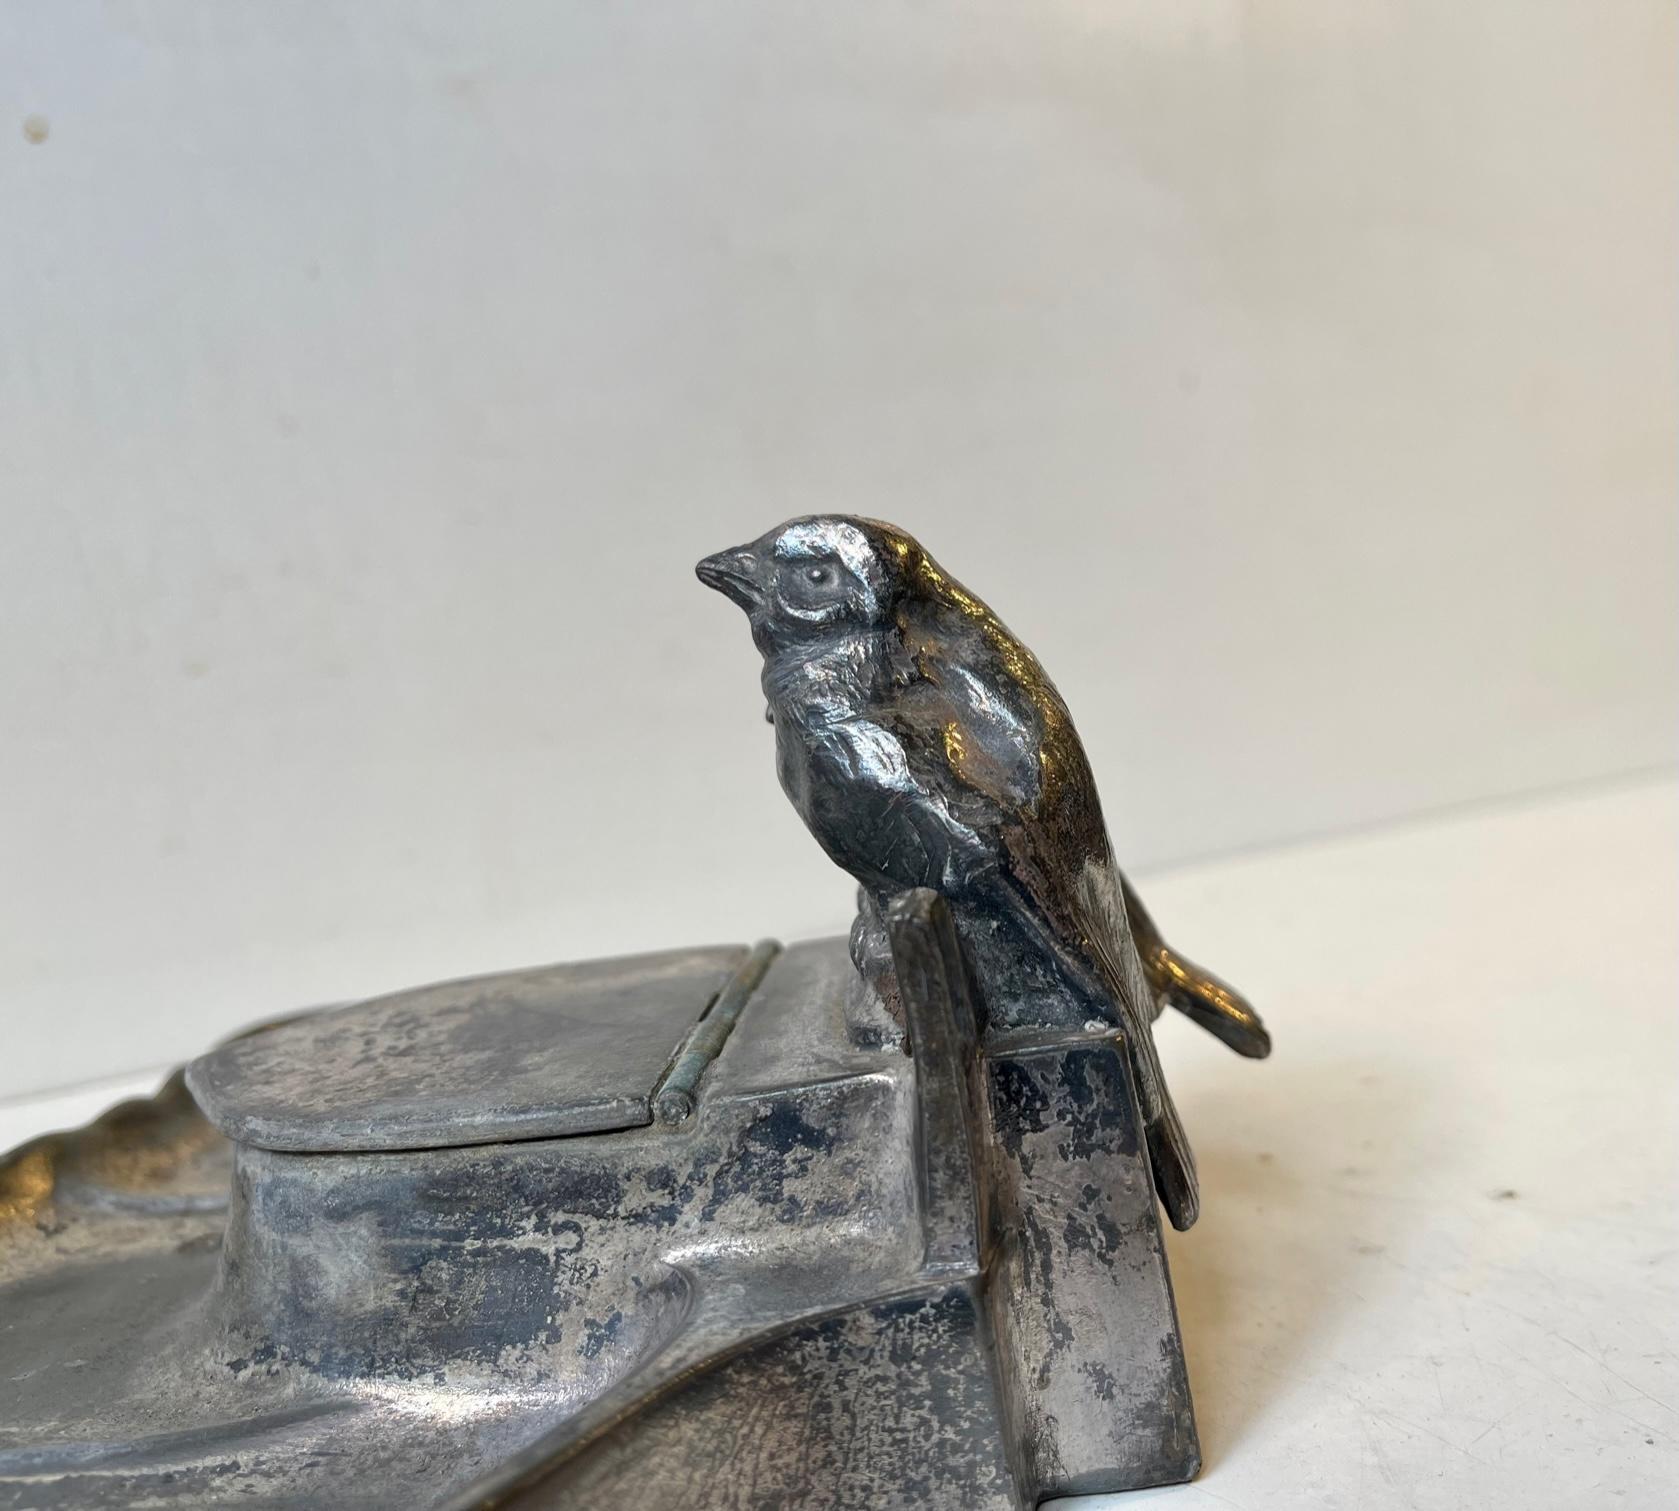 Decorative inkwell with two small lovebirds and original ink-glass. Manufactured by Kayserzinn in Germany circa 1910. It features a rustic authentic patina and the original silver-plating has largely worn of giving it character and charm.